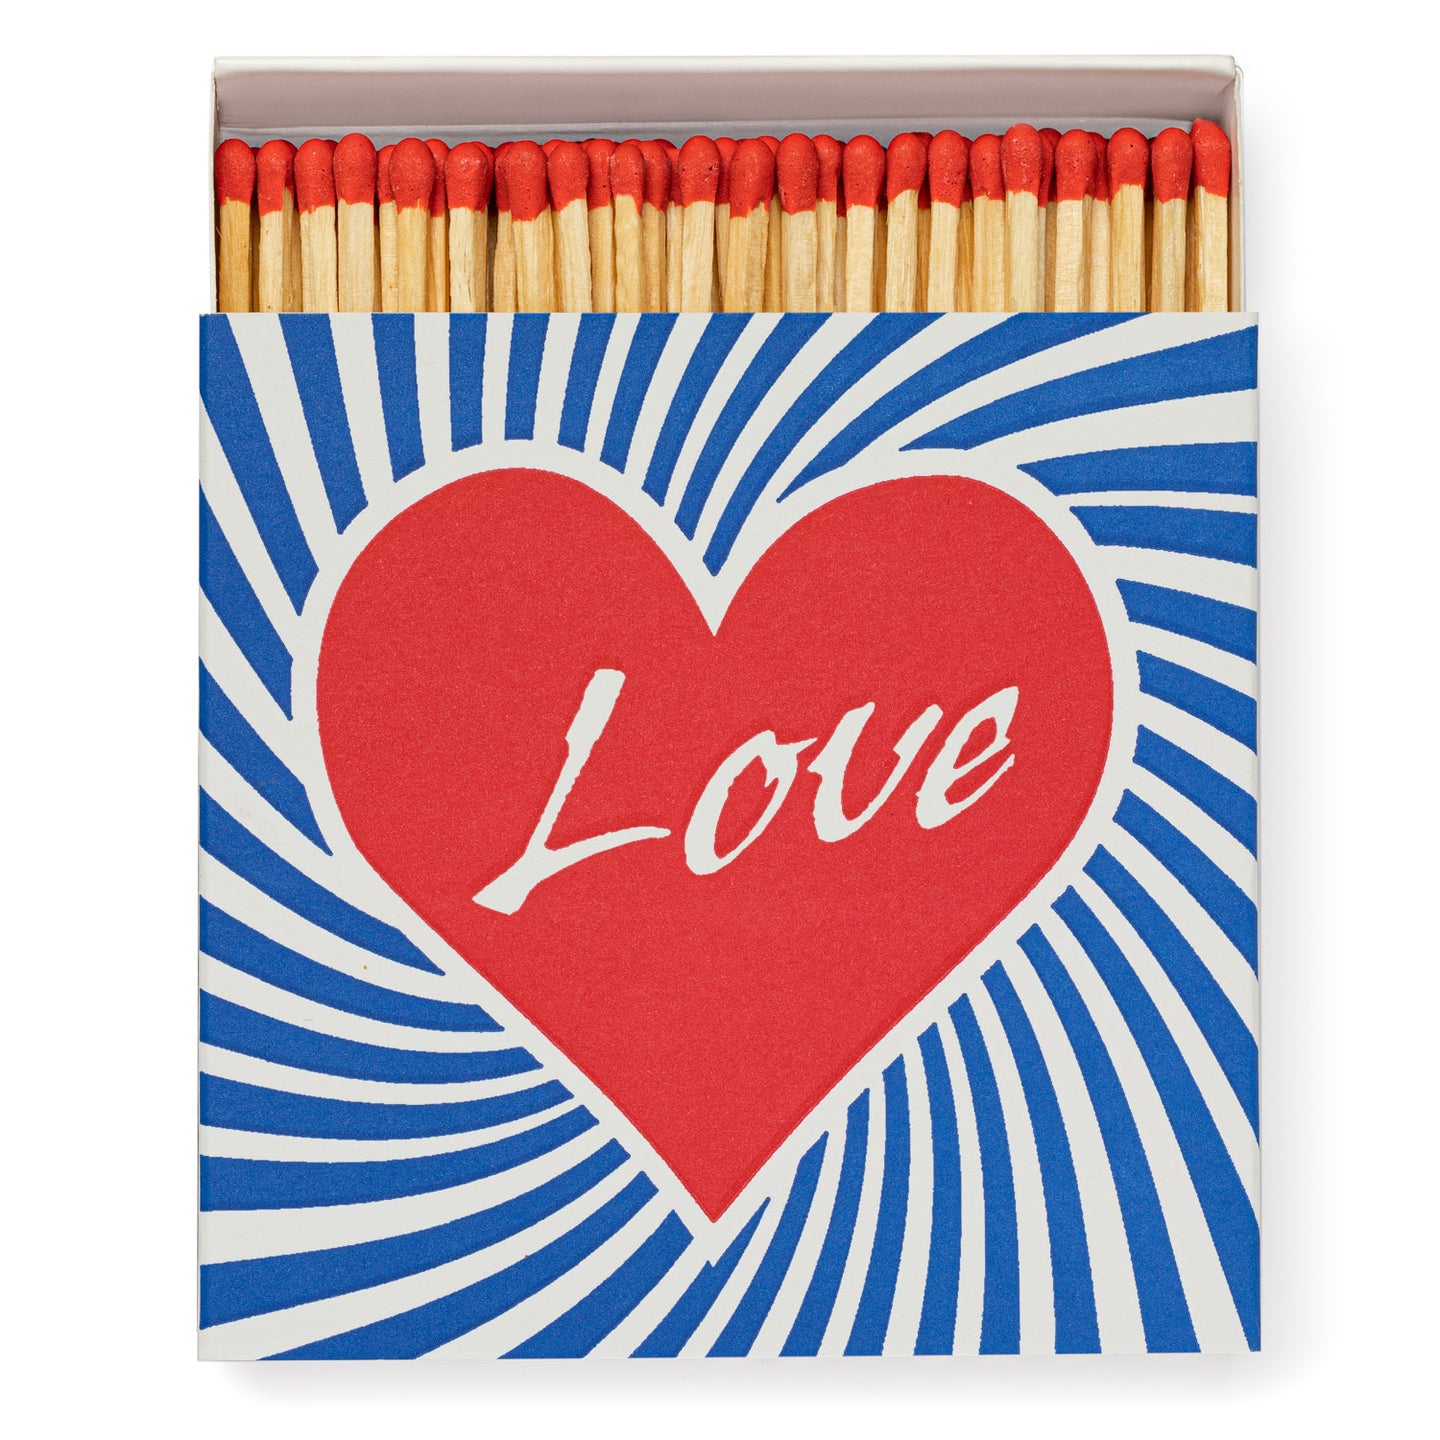 LOVE - Safety Matches